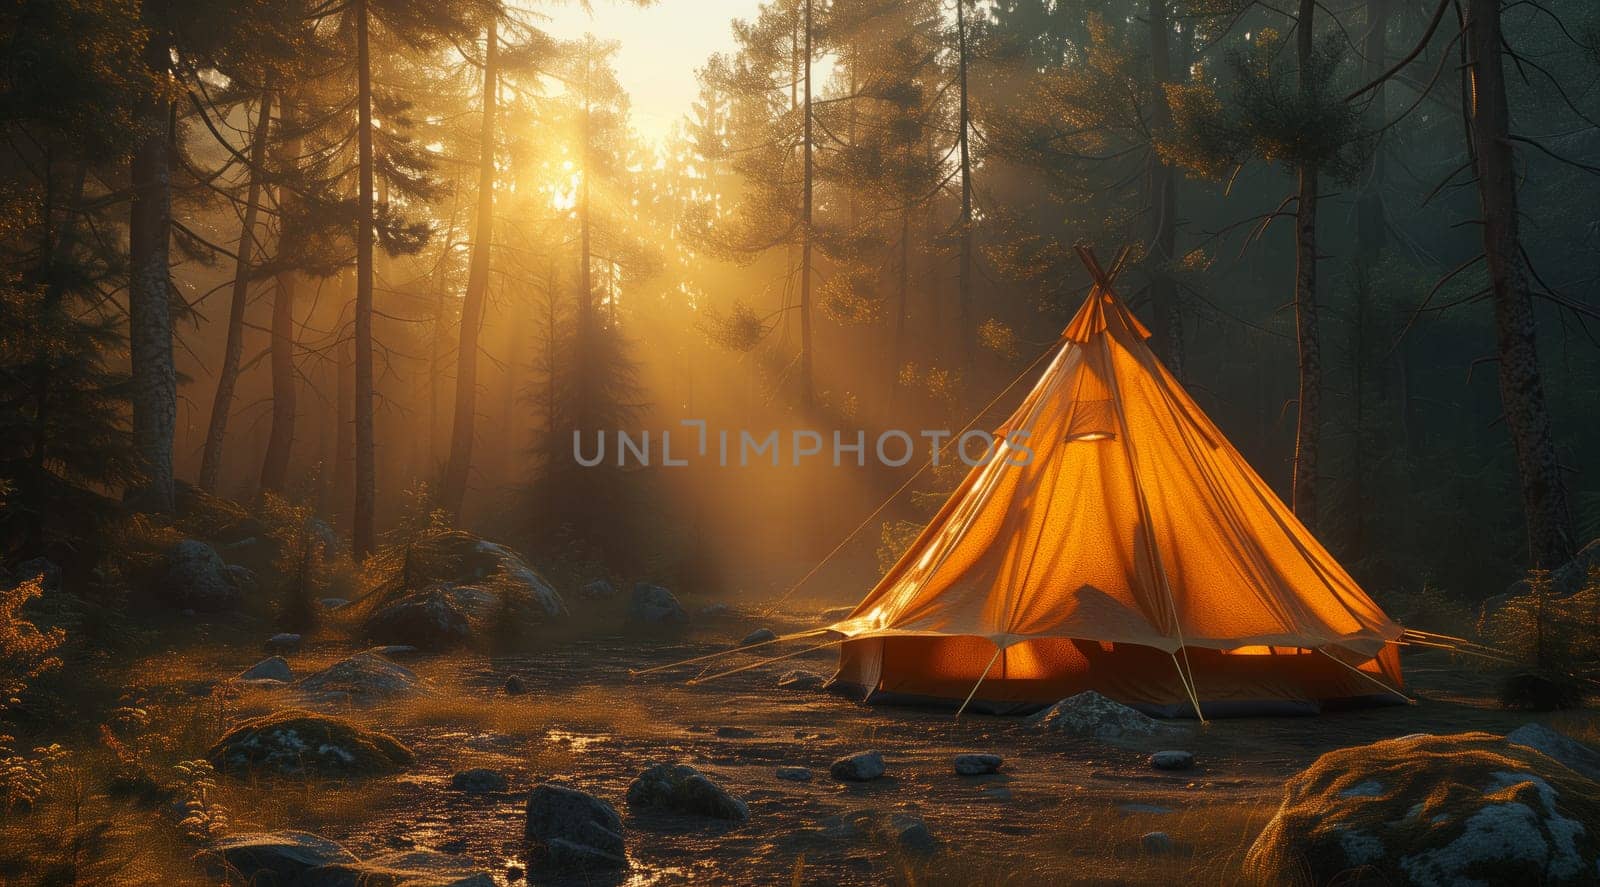 A triangular tent sits amidst the forest with sunlight filtering through the trees, casting tints and shades on the natural landscape